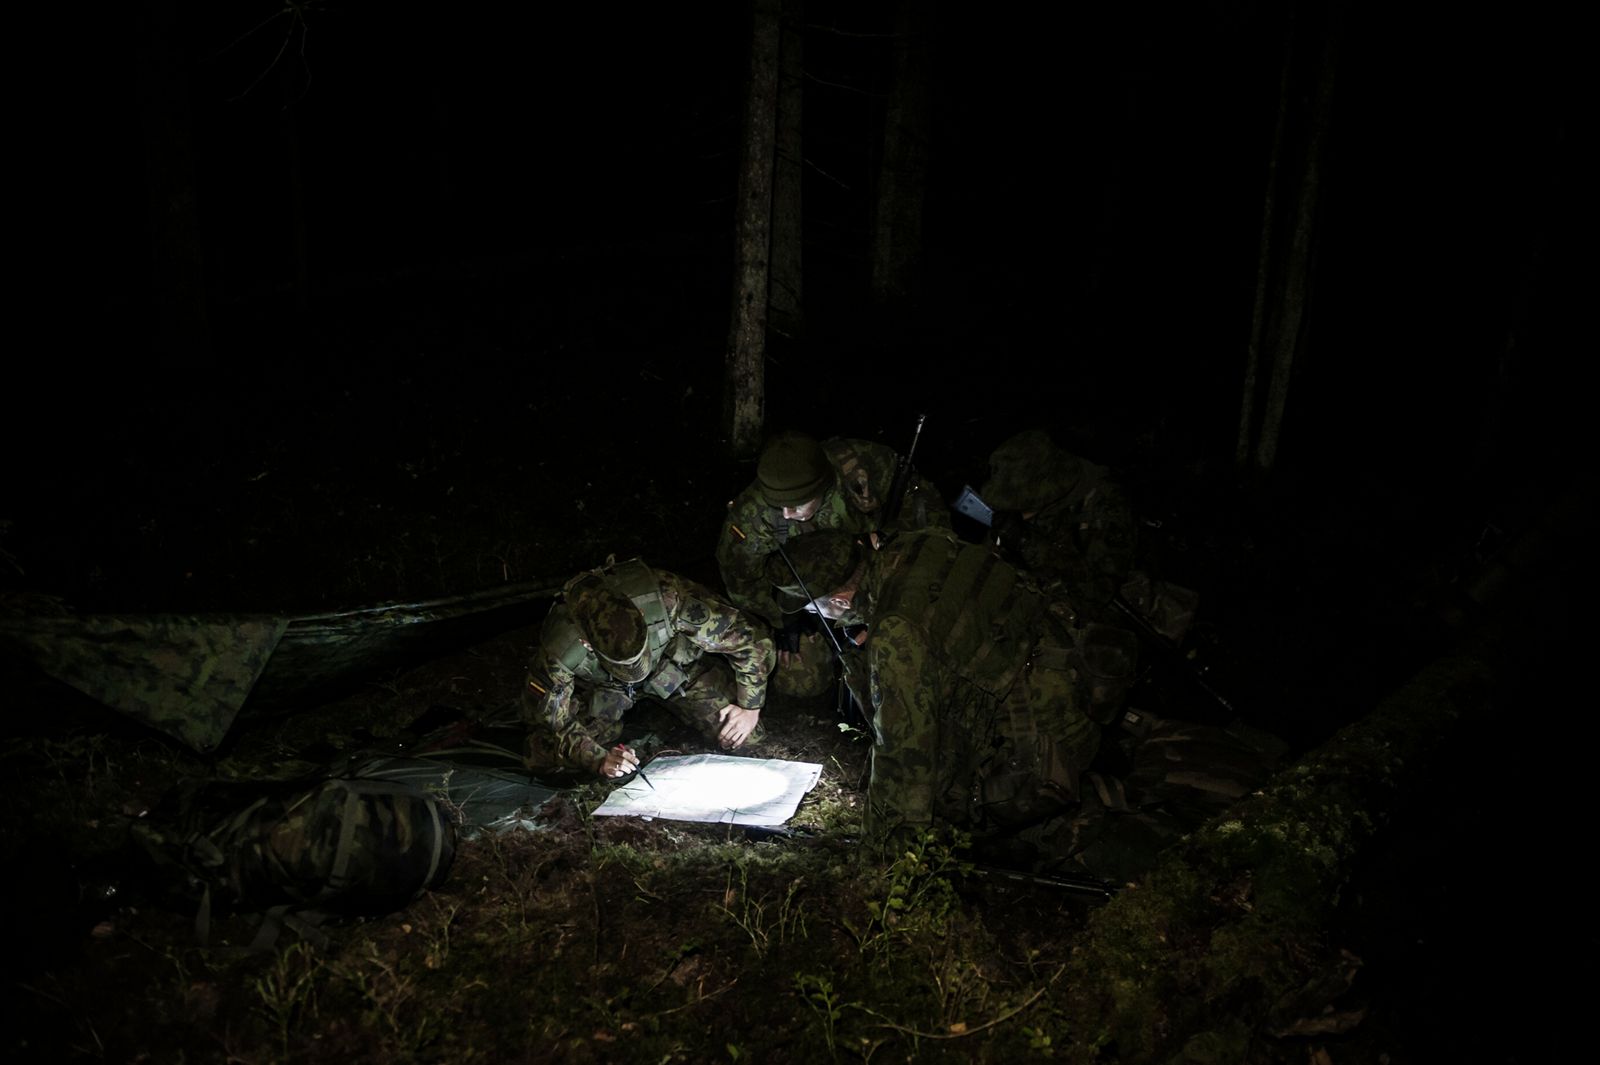 © Mattia Vacca - Cadets during night training in the forests in Central Lithuania.